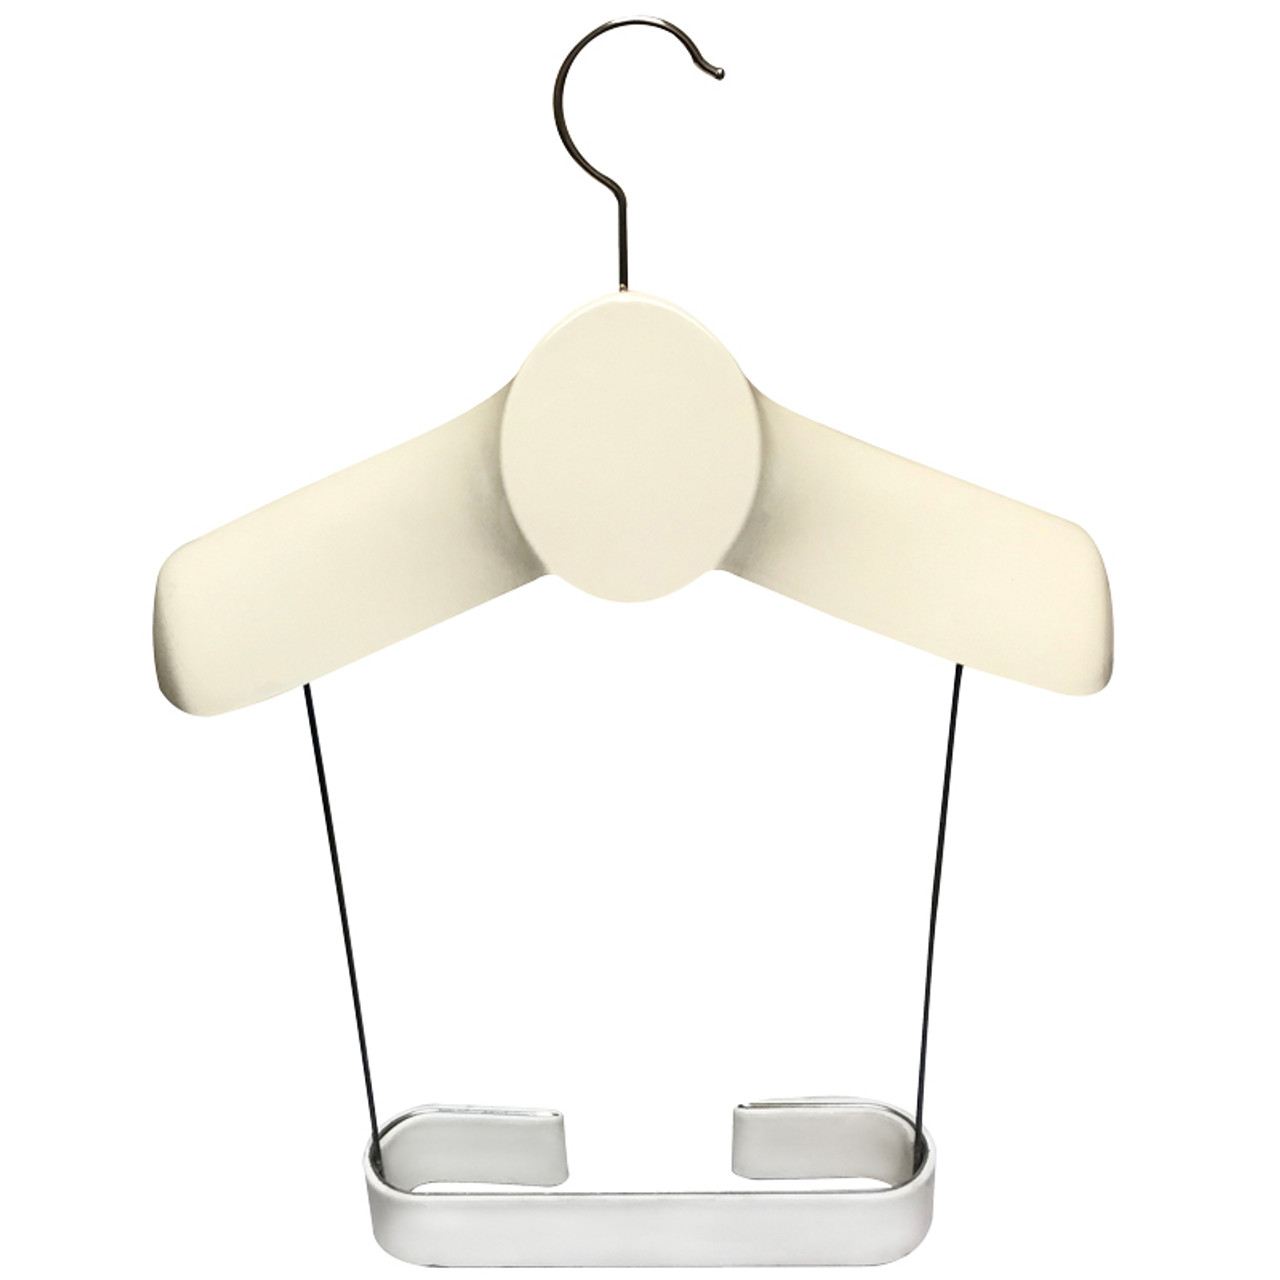 Cream 16" Display Hanger w/Chrome Hook and waist drop - Limited Quantities